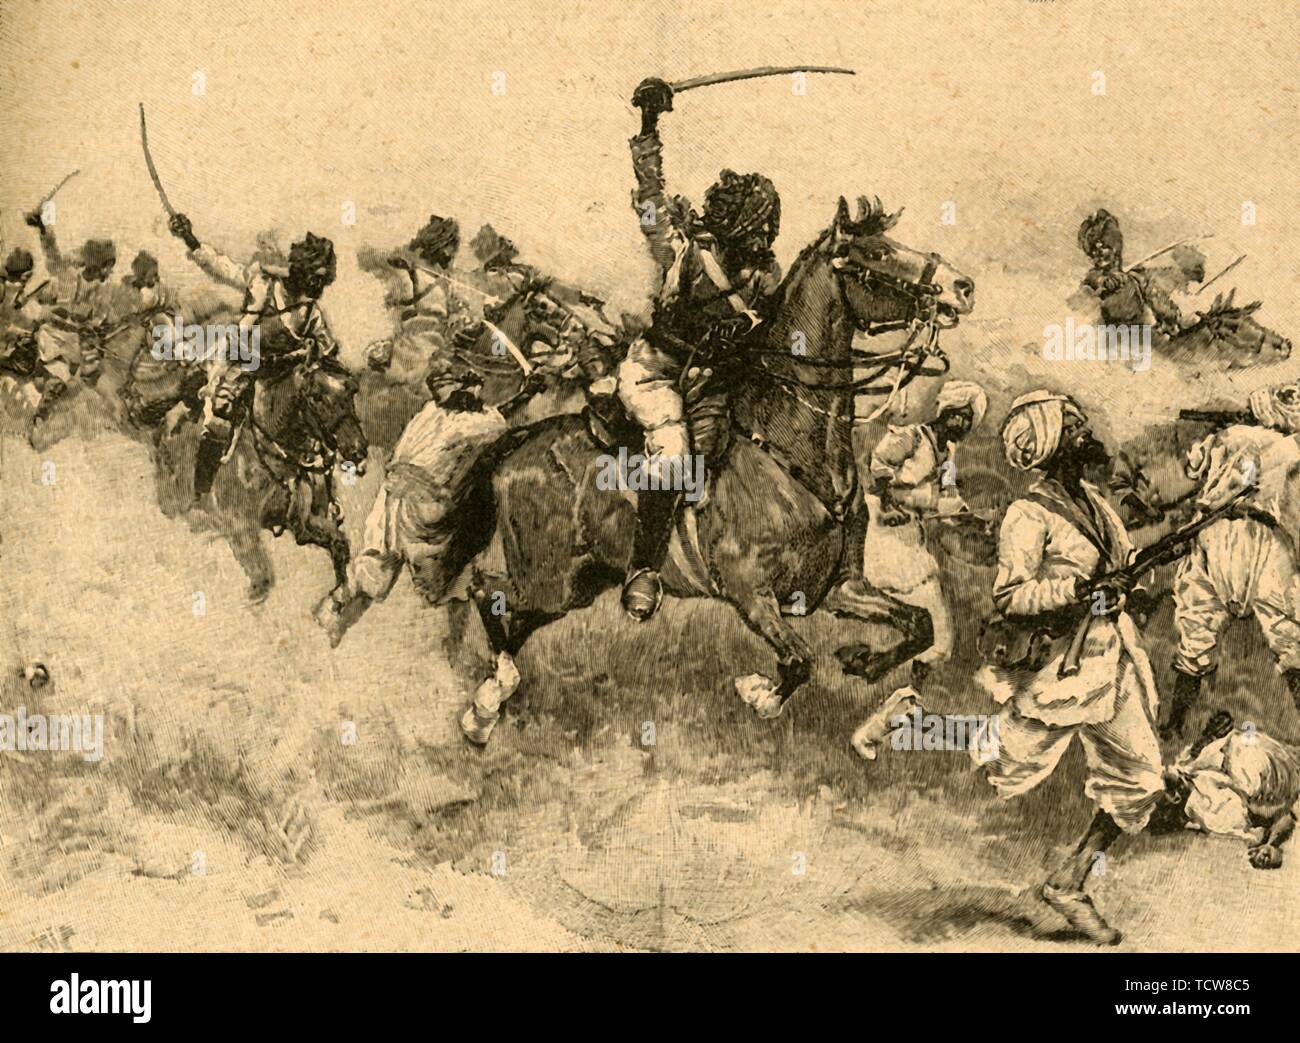 Charge of the cavalry at the Battle of Miani (Meeanee), Sindh, India, 1843 (c1890). Creator: Unknown. Stock Photo